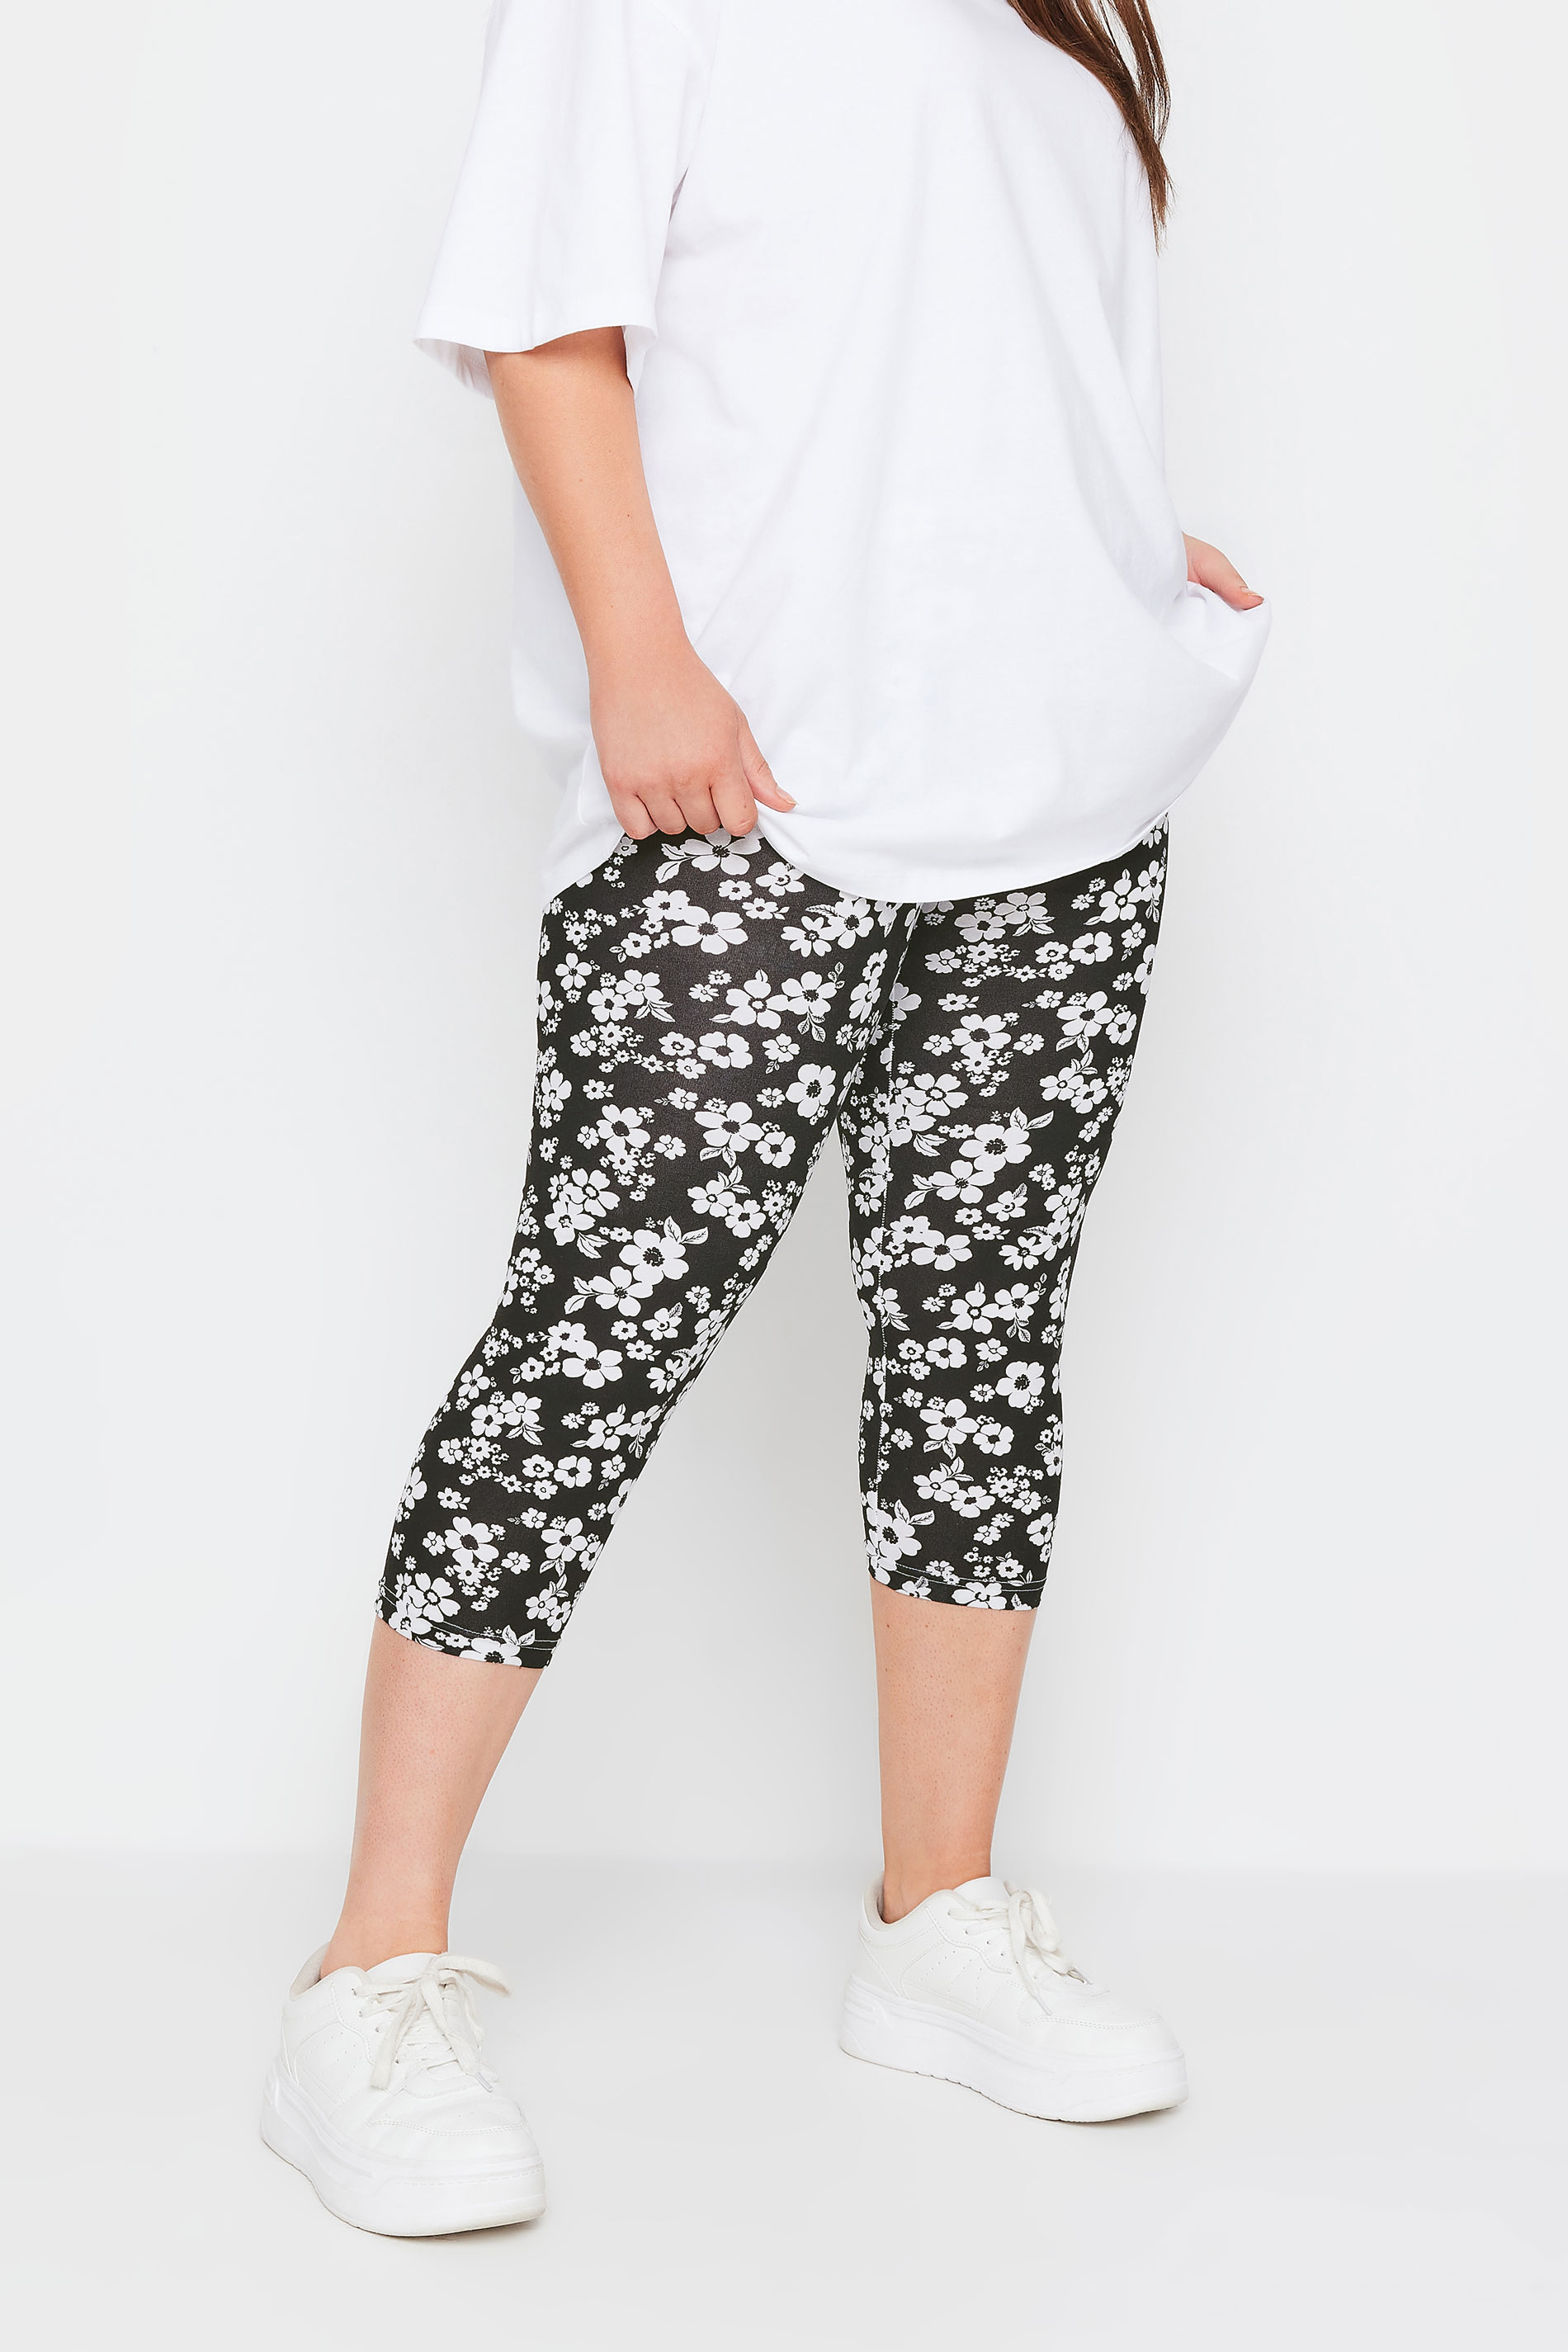 YOURS Plus Size 2 PACK Black Floral Print Cropped Leggings | Yours Clothing 2